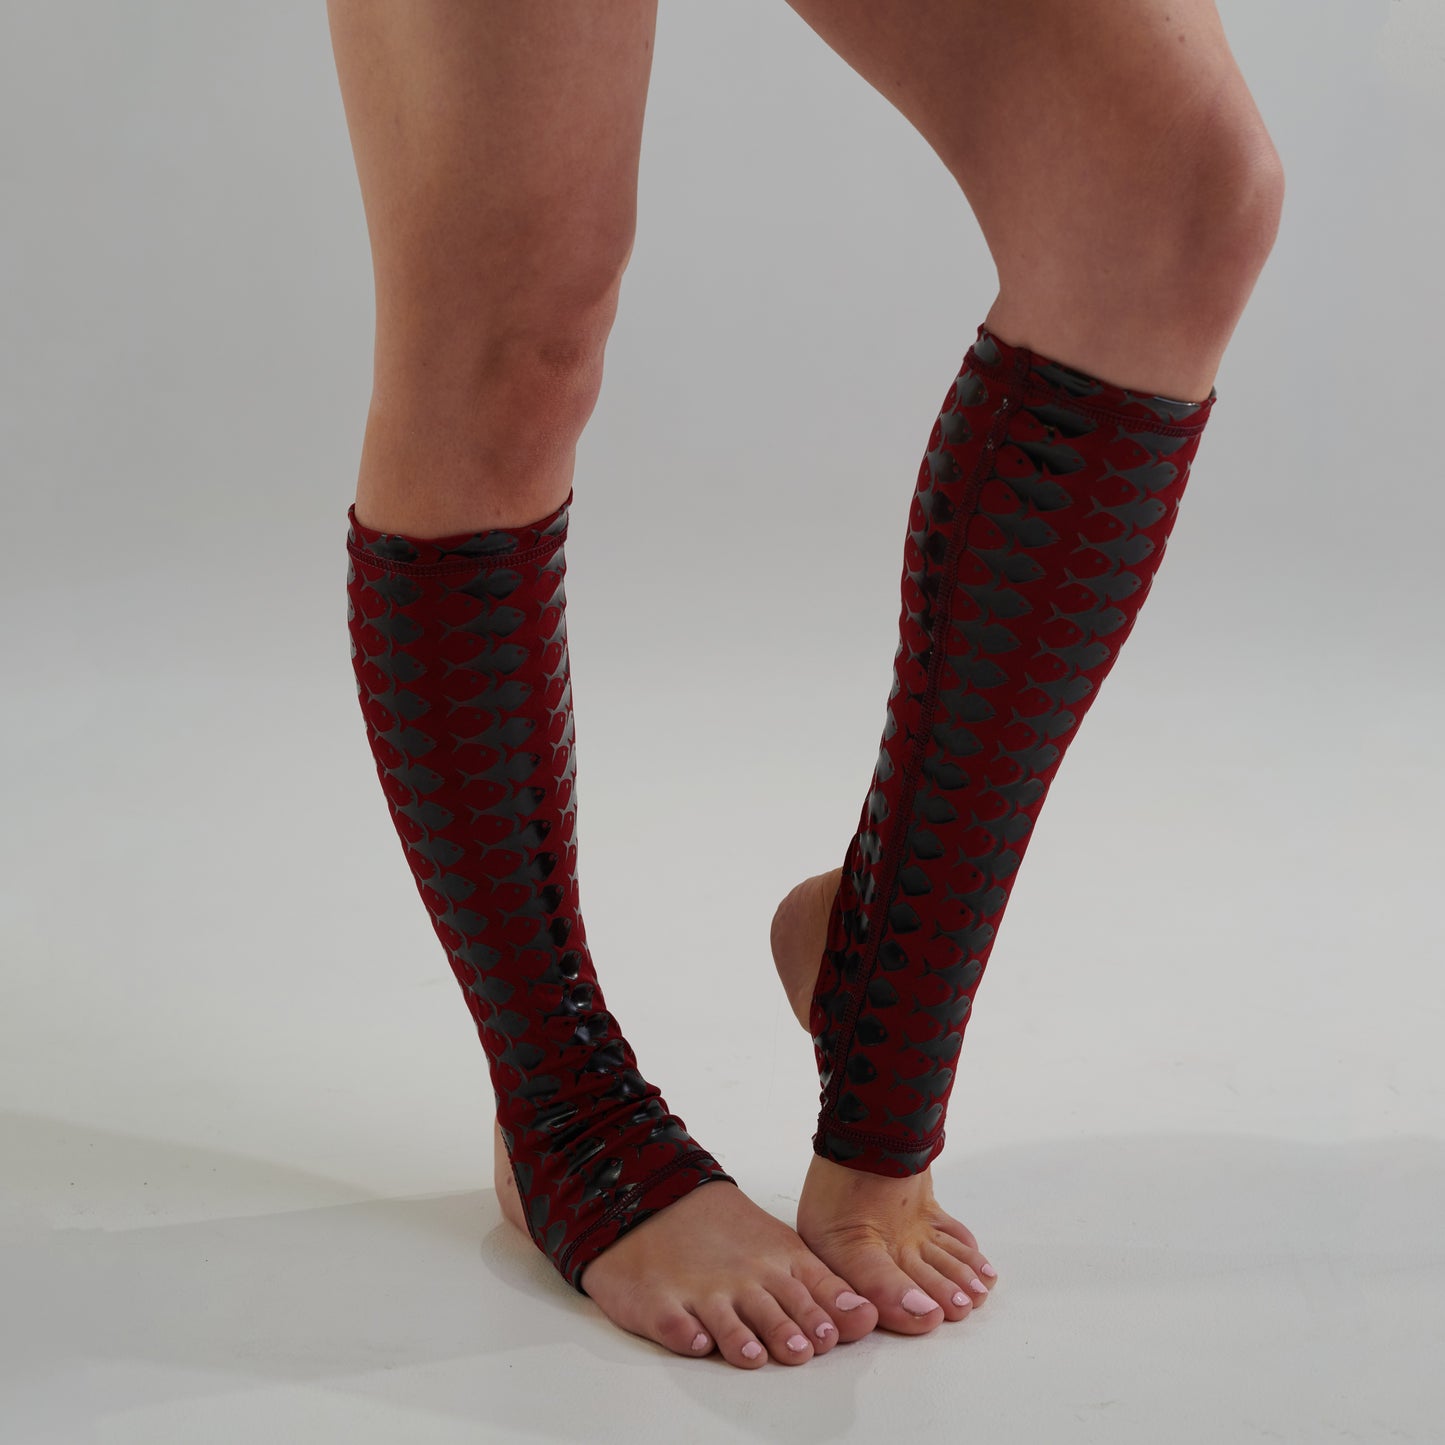 Sticky Leg Warmers 40% off strictly while stocks last.